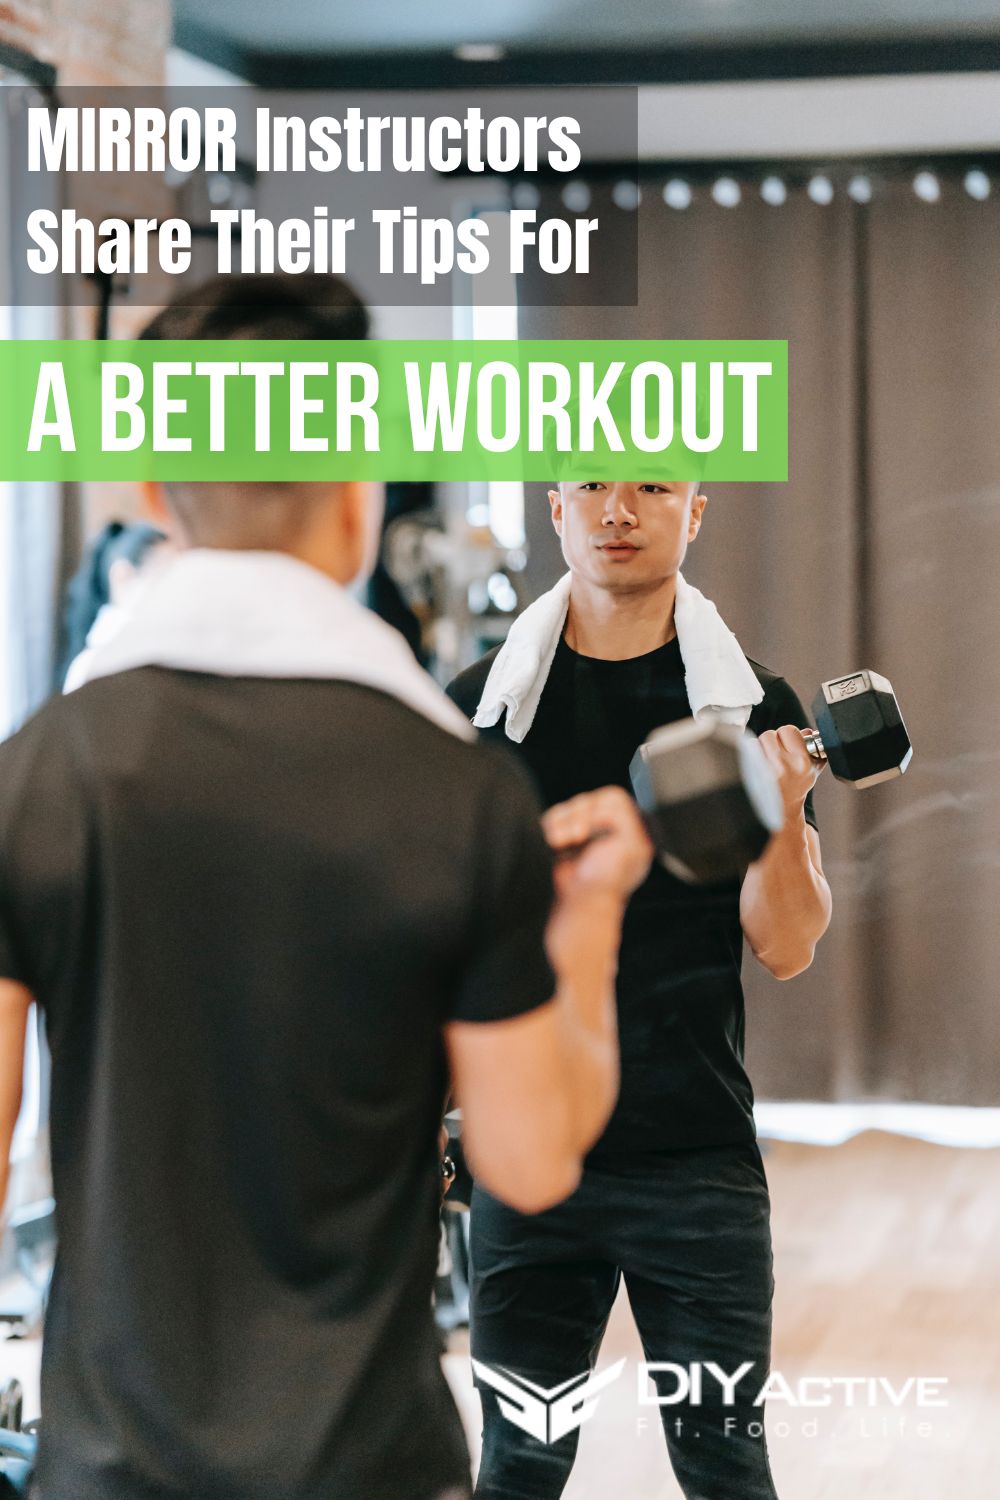 MIRROR Instructors Share Their Tips For A Better Workout